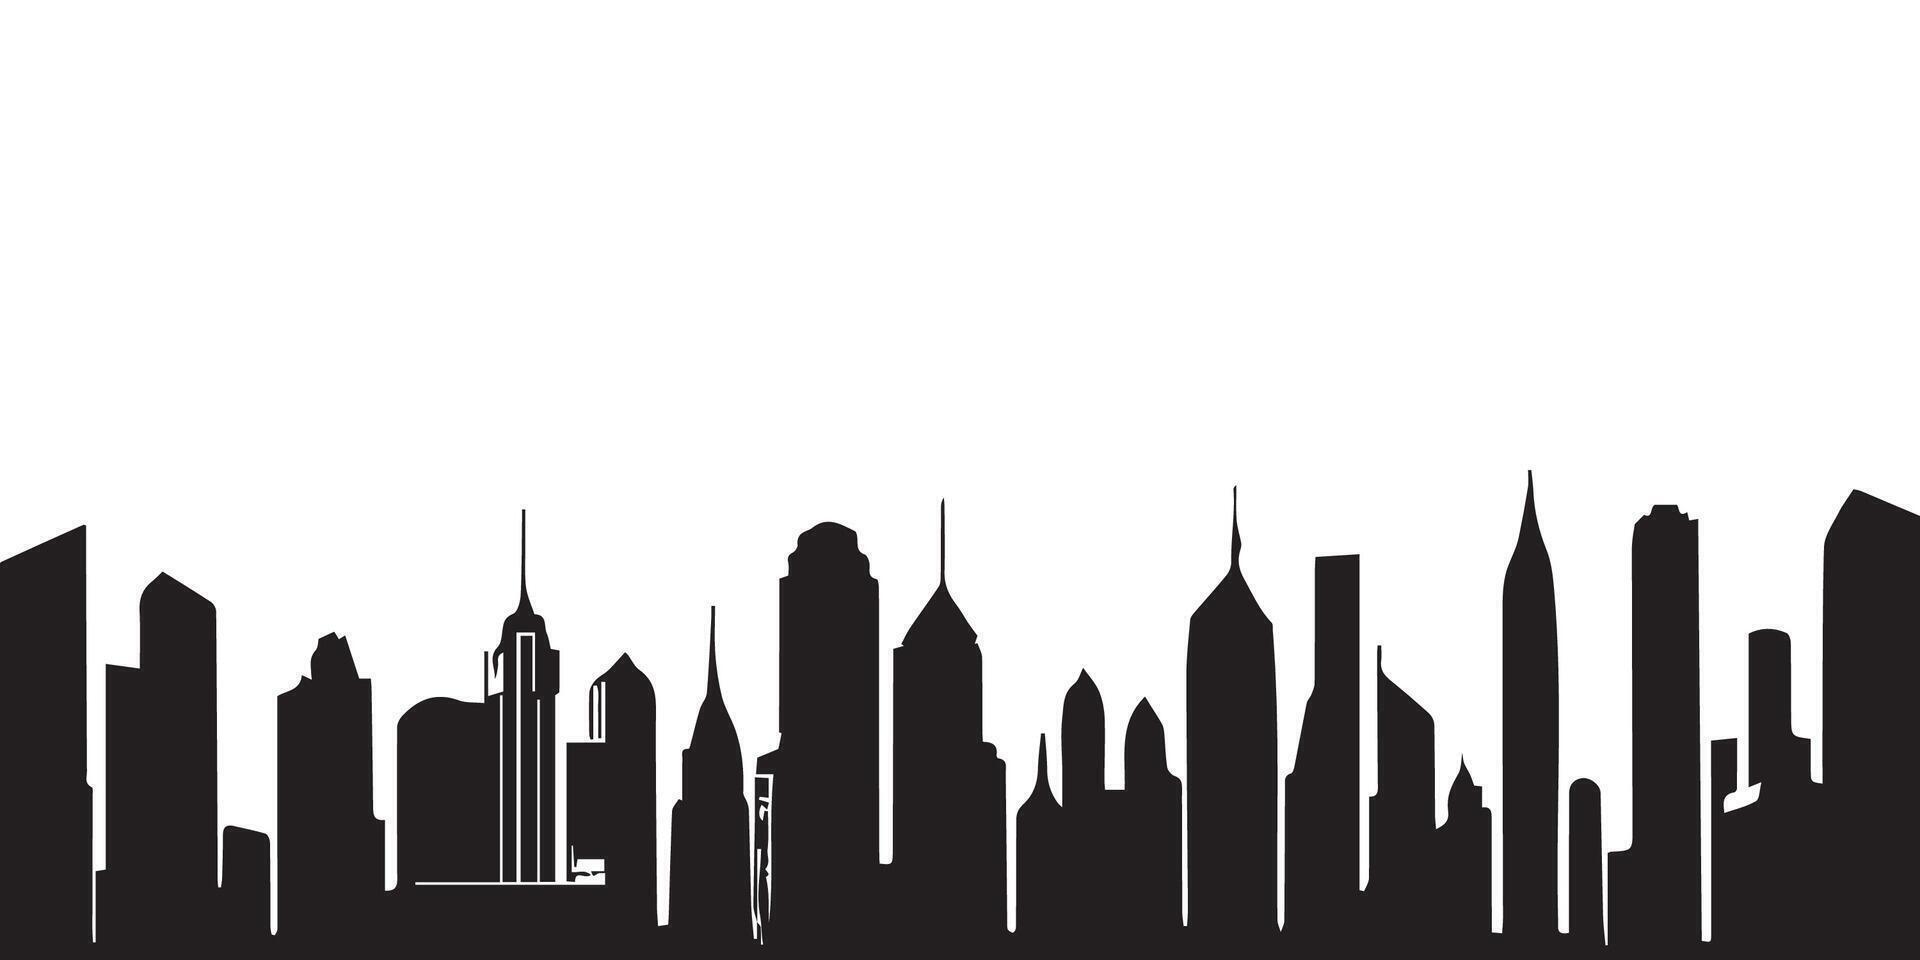 Cityscape silhouette vector, urban skyline isolated on white. Modern city architecture, skyscrapers, buildings vector